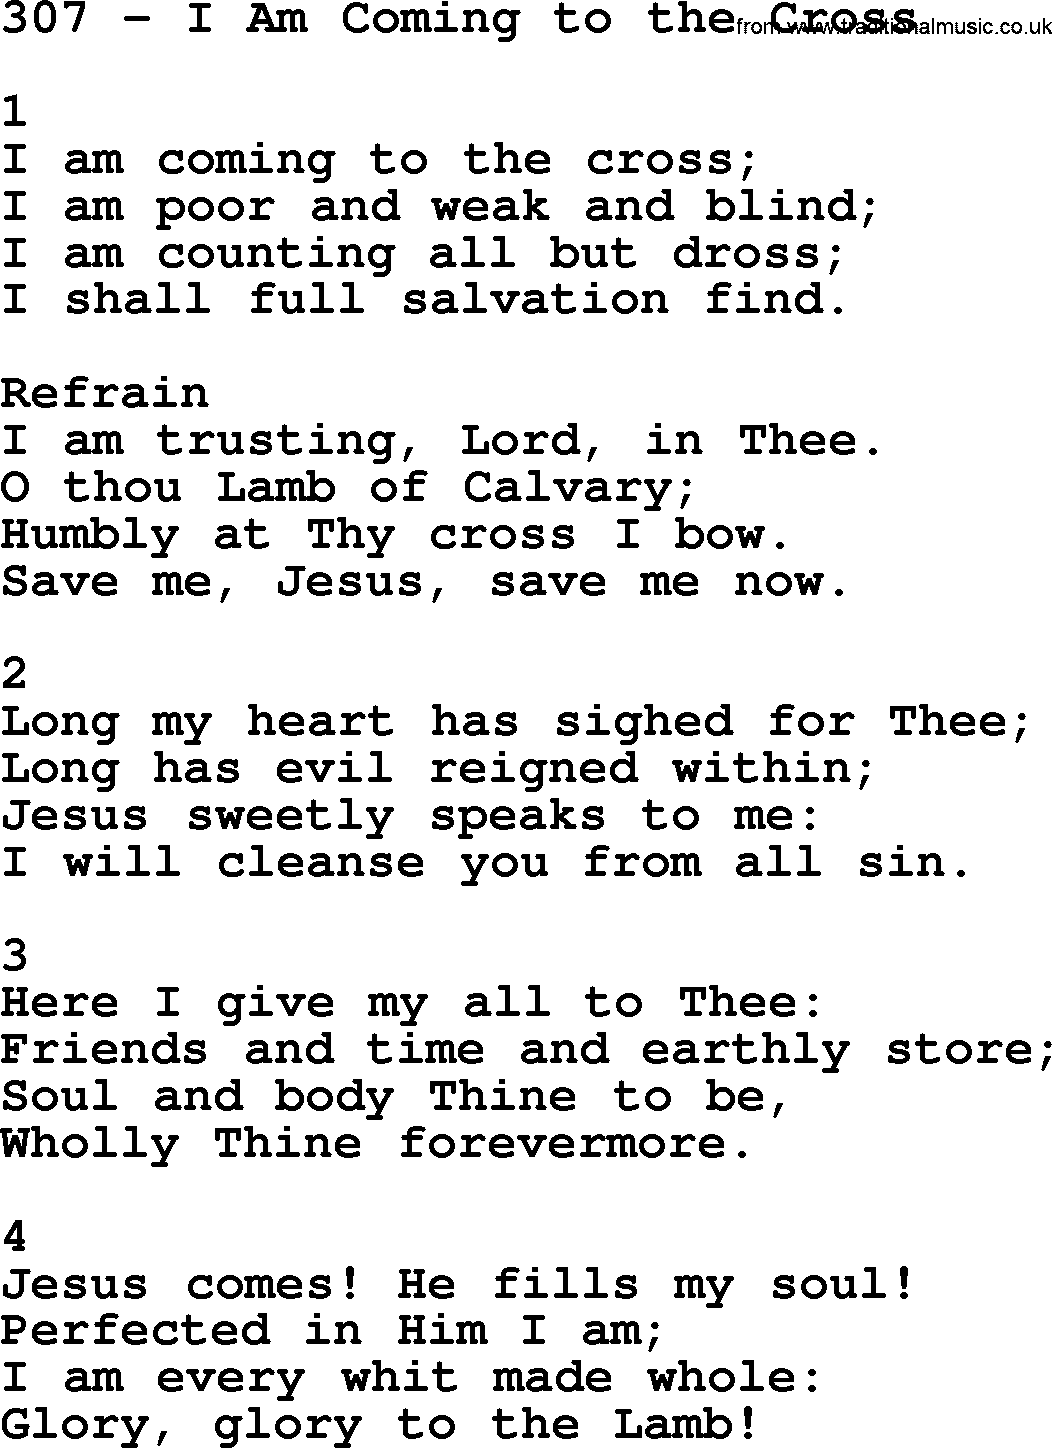 Complete Adventis Hymnal, title: 307-I Am Coming To The Cross, with lyrics, midi, mp3, powerpoints(PPT) and PDF,